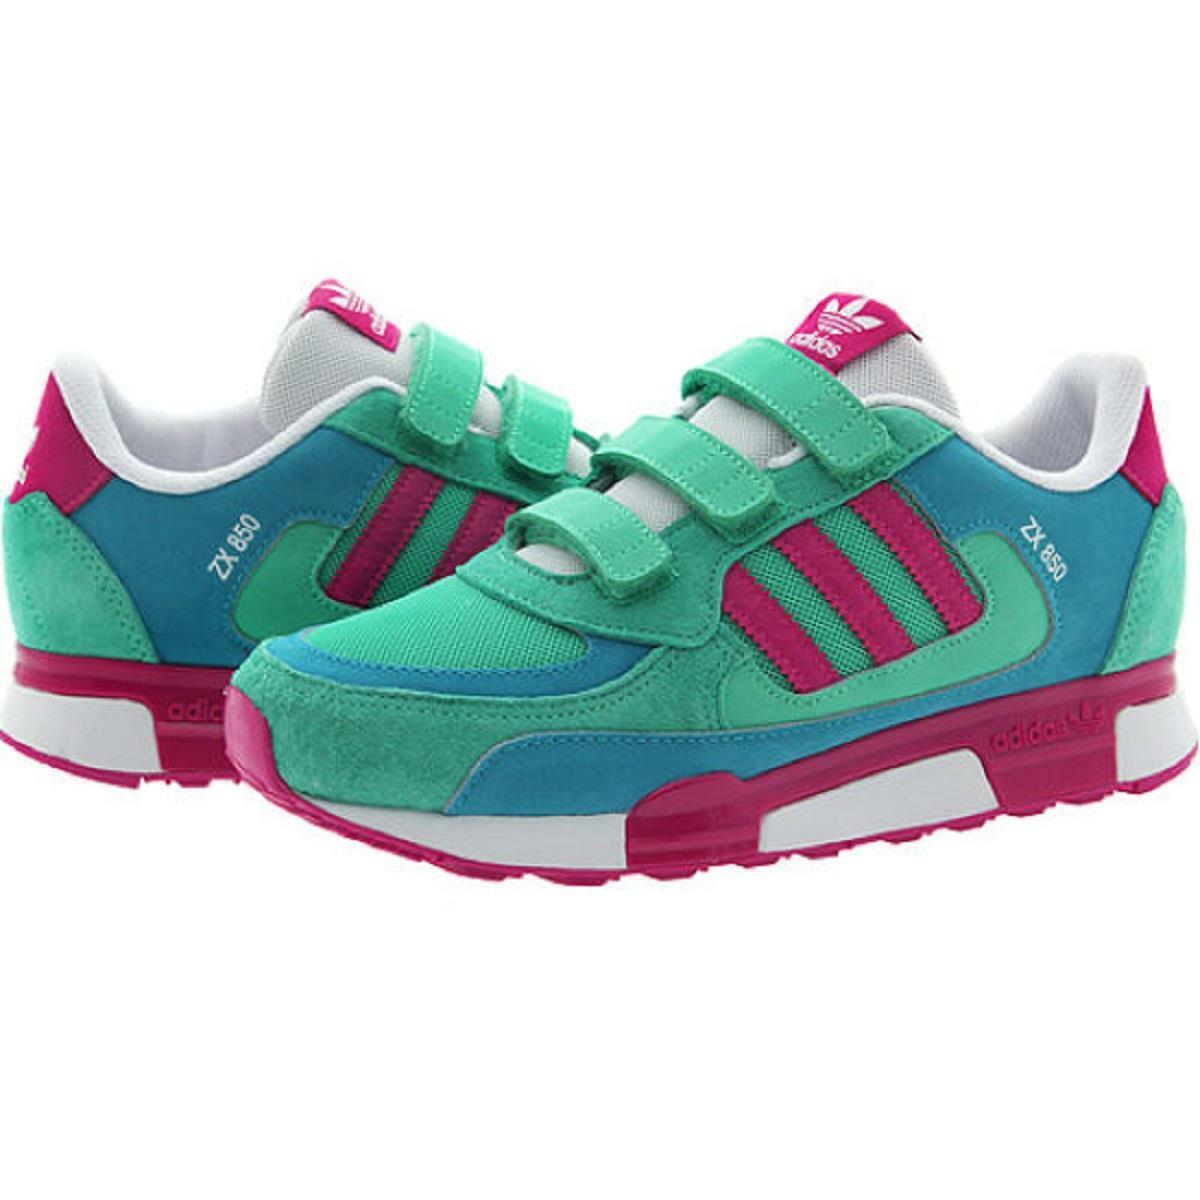 FW22 adidas Shoes Zx 850 Cf K Sneakers Mens Womens Kids Gym M18021